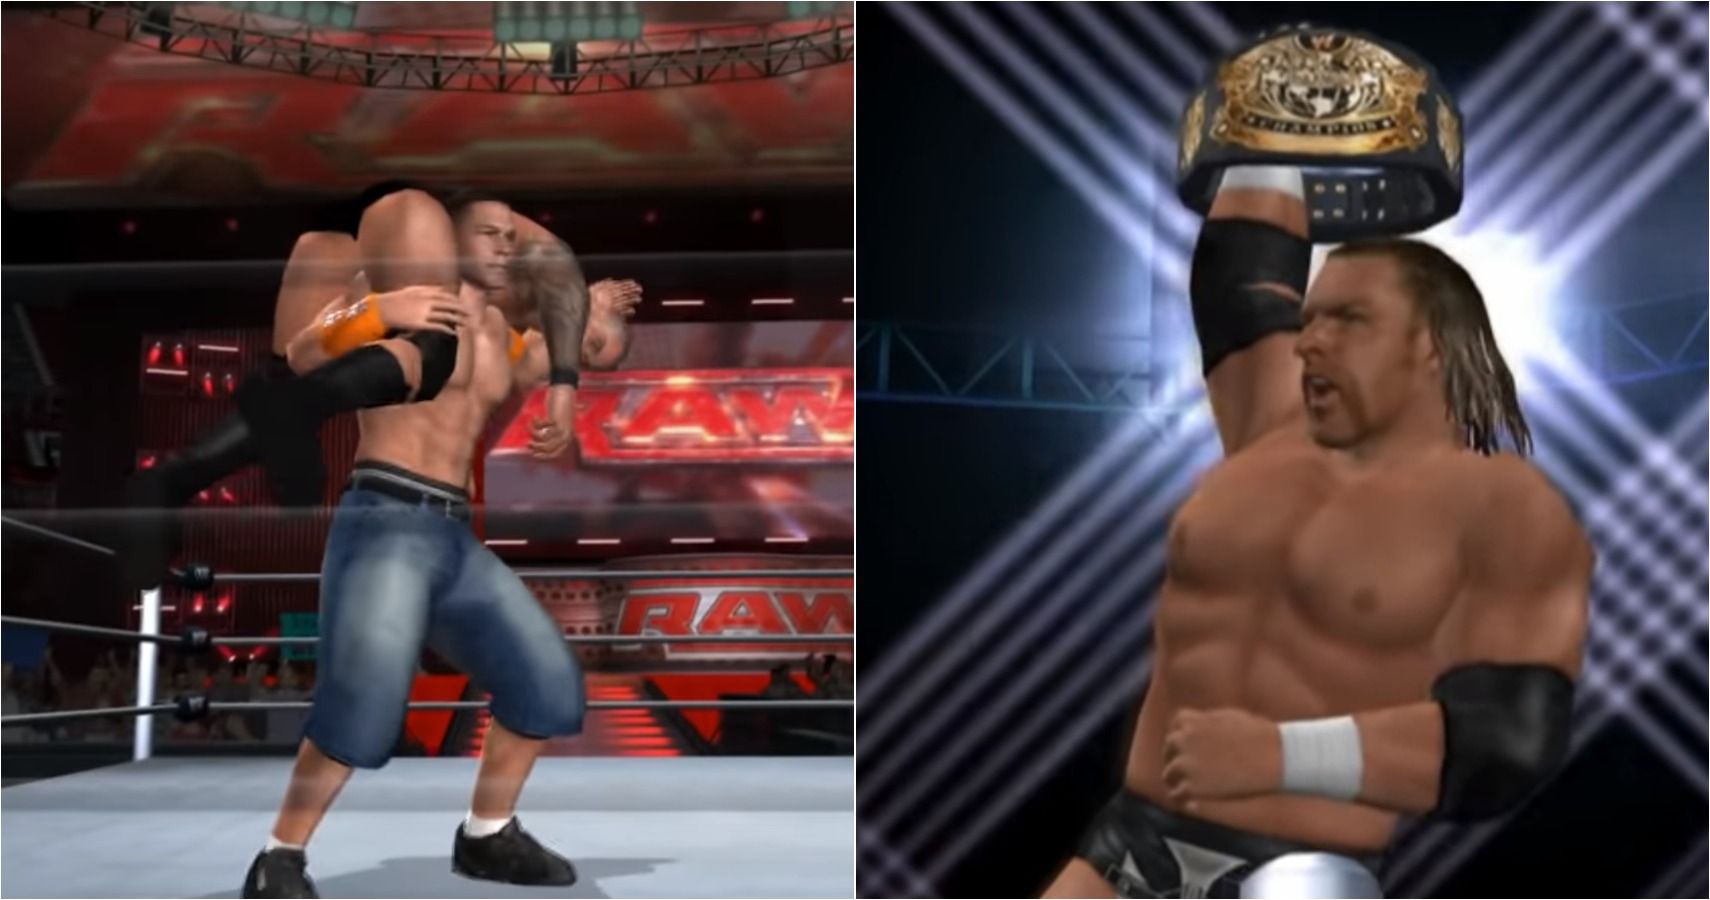 WWE SmackDown Shut Your Mouth ROM - PS2 Download - Emulator Games